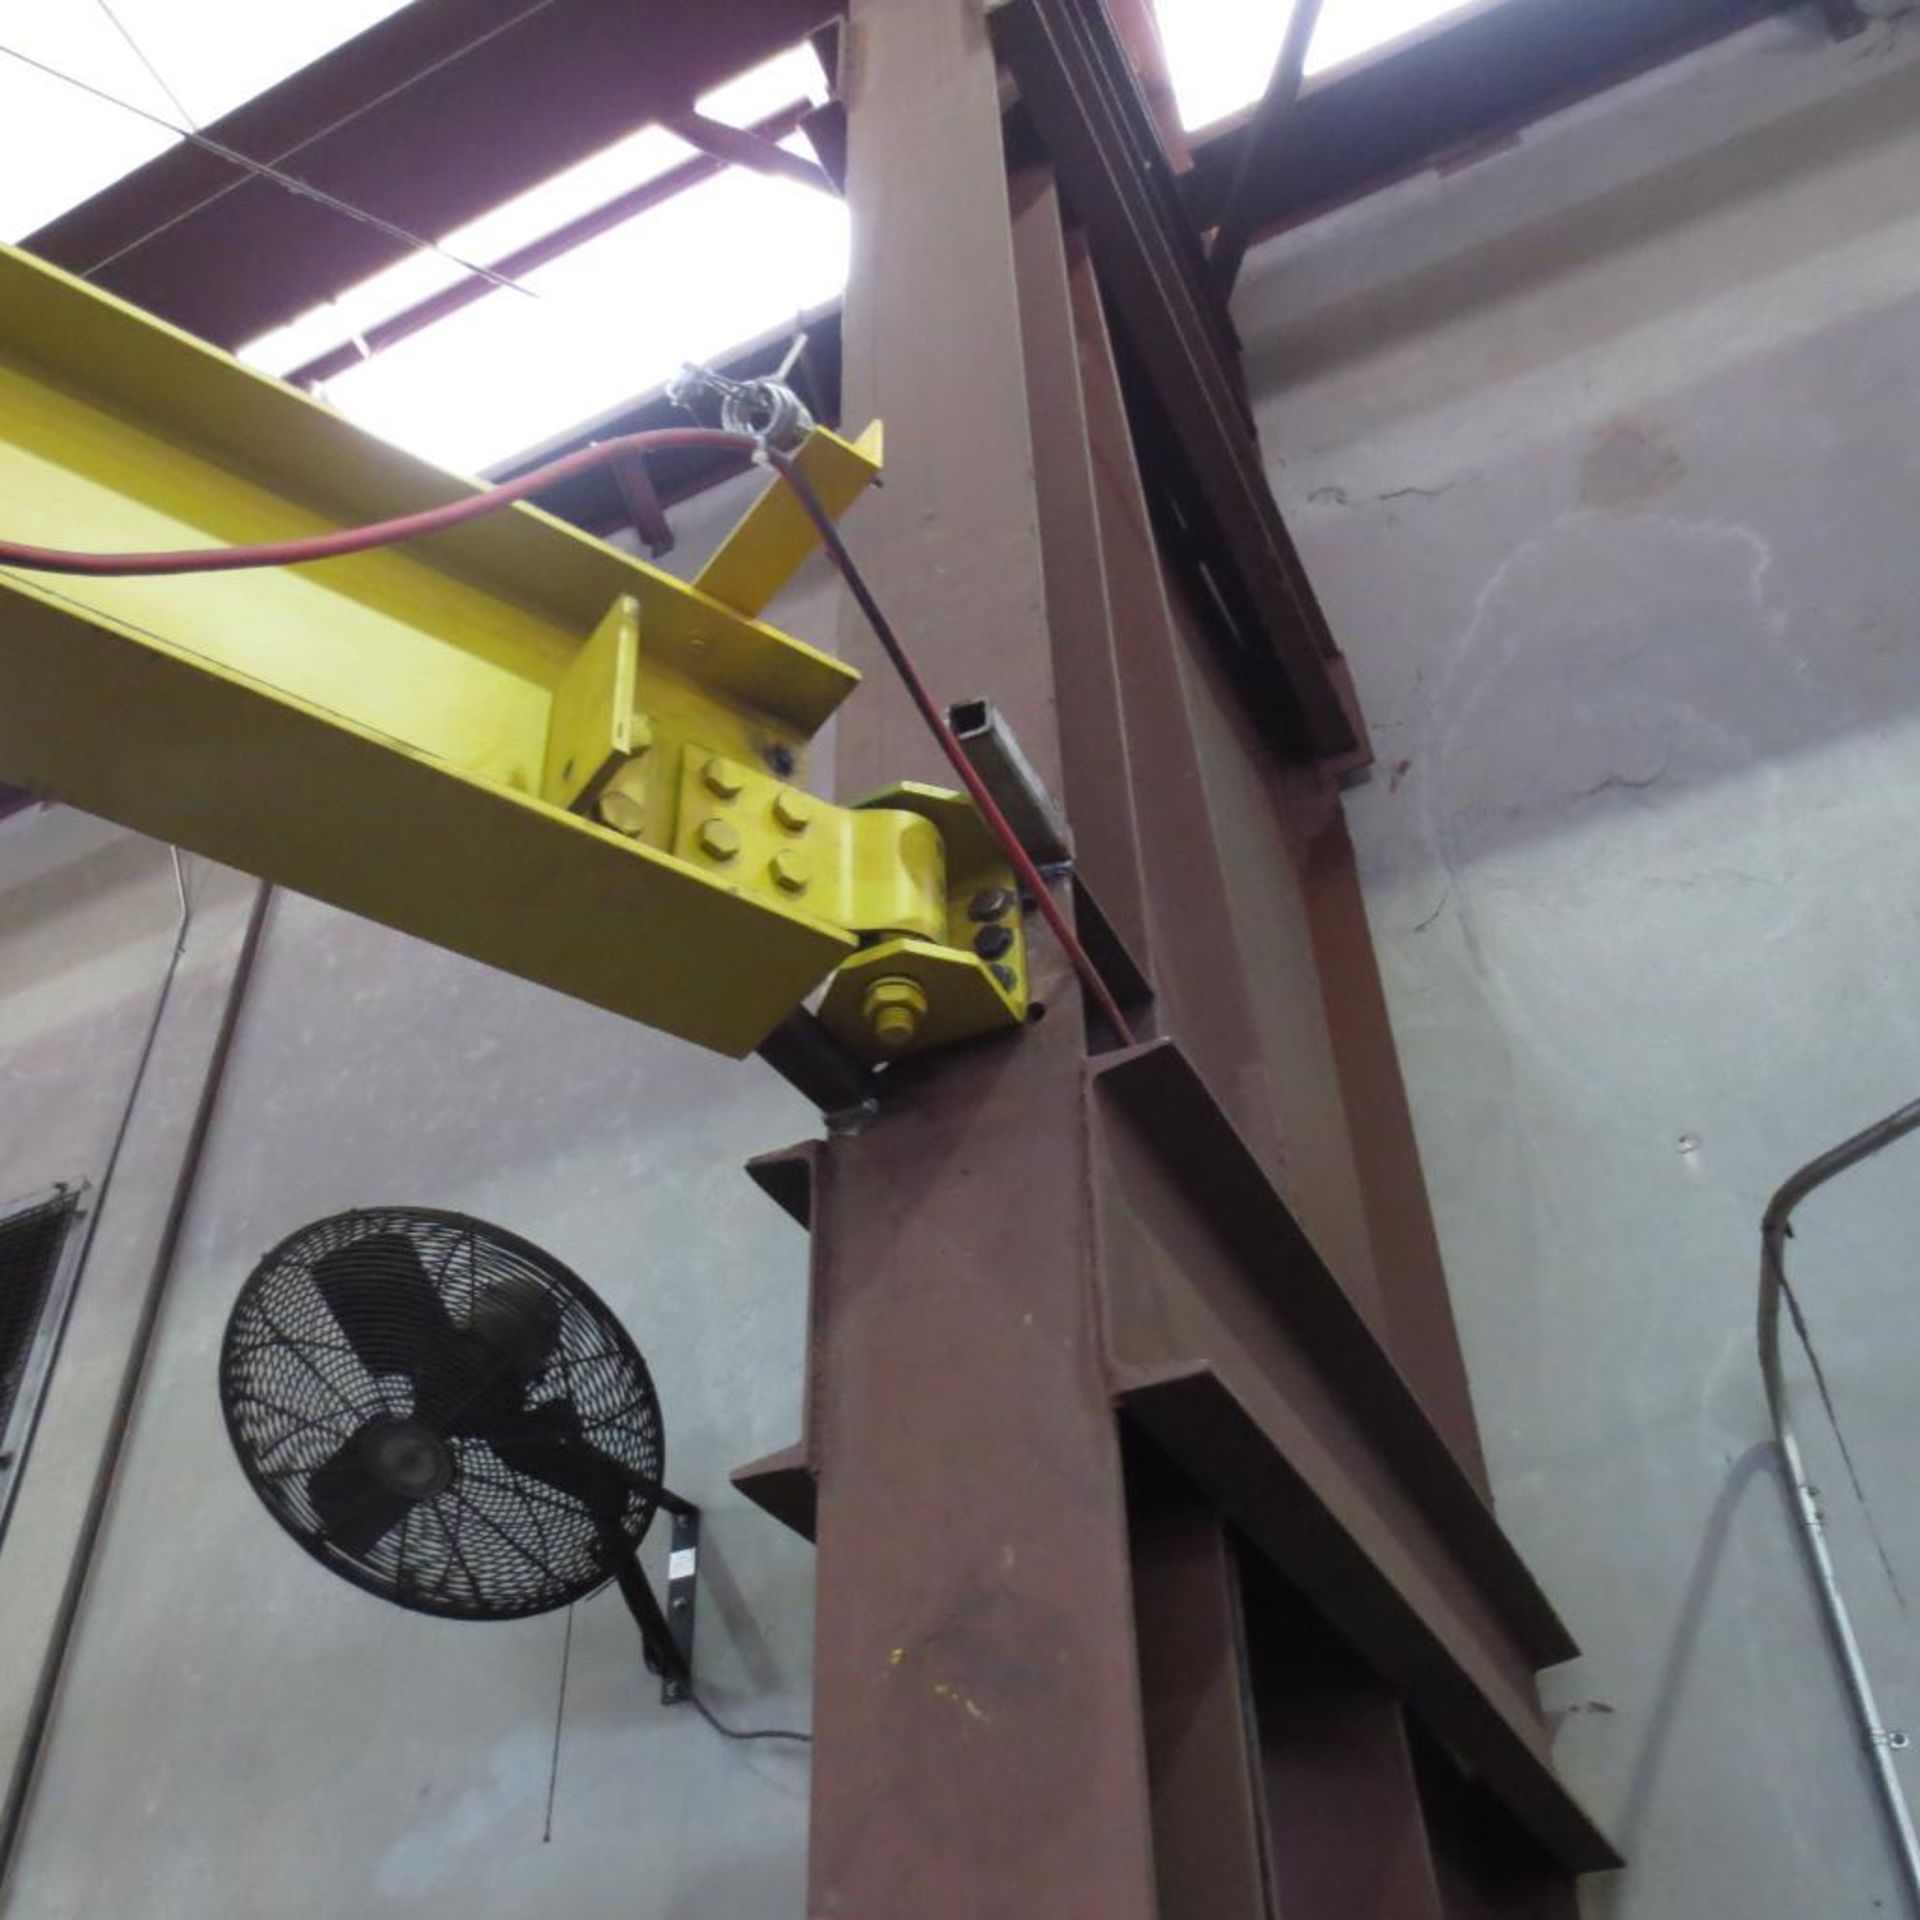 Cold Wall 1/2 Ton Wall Mounted Jib Est. 20' Long with Dayton 1 ton Electric Hoist - Image 4 of 4